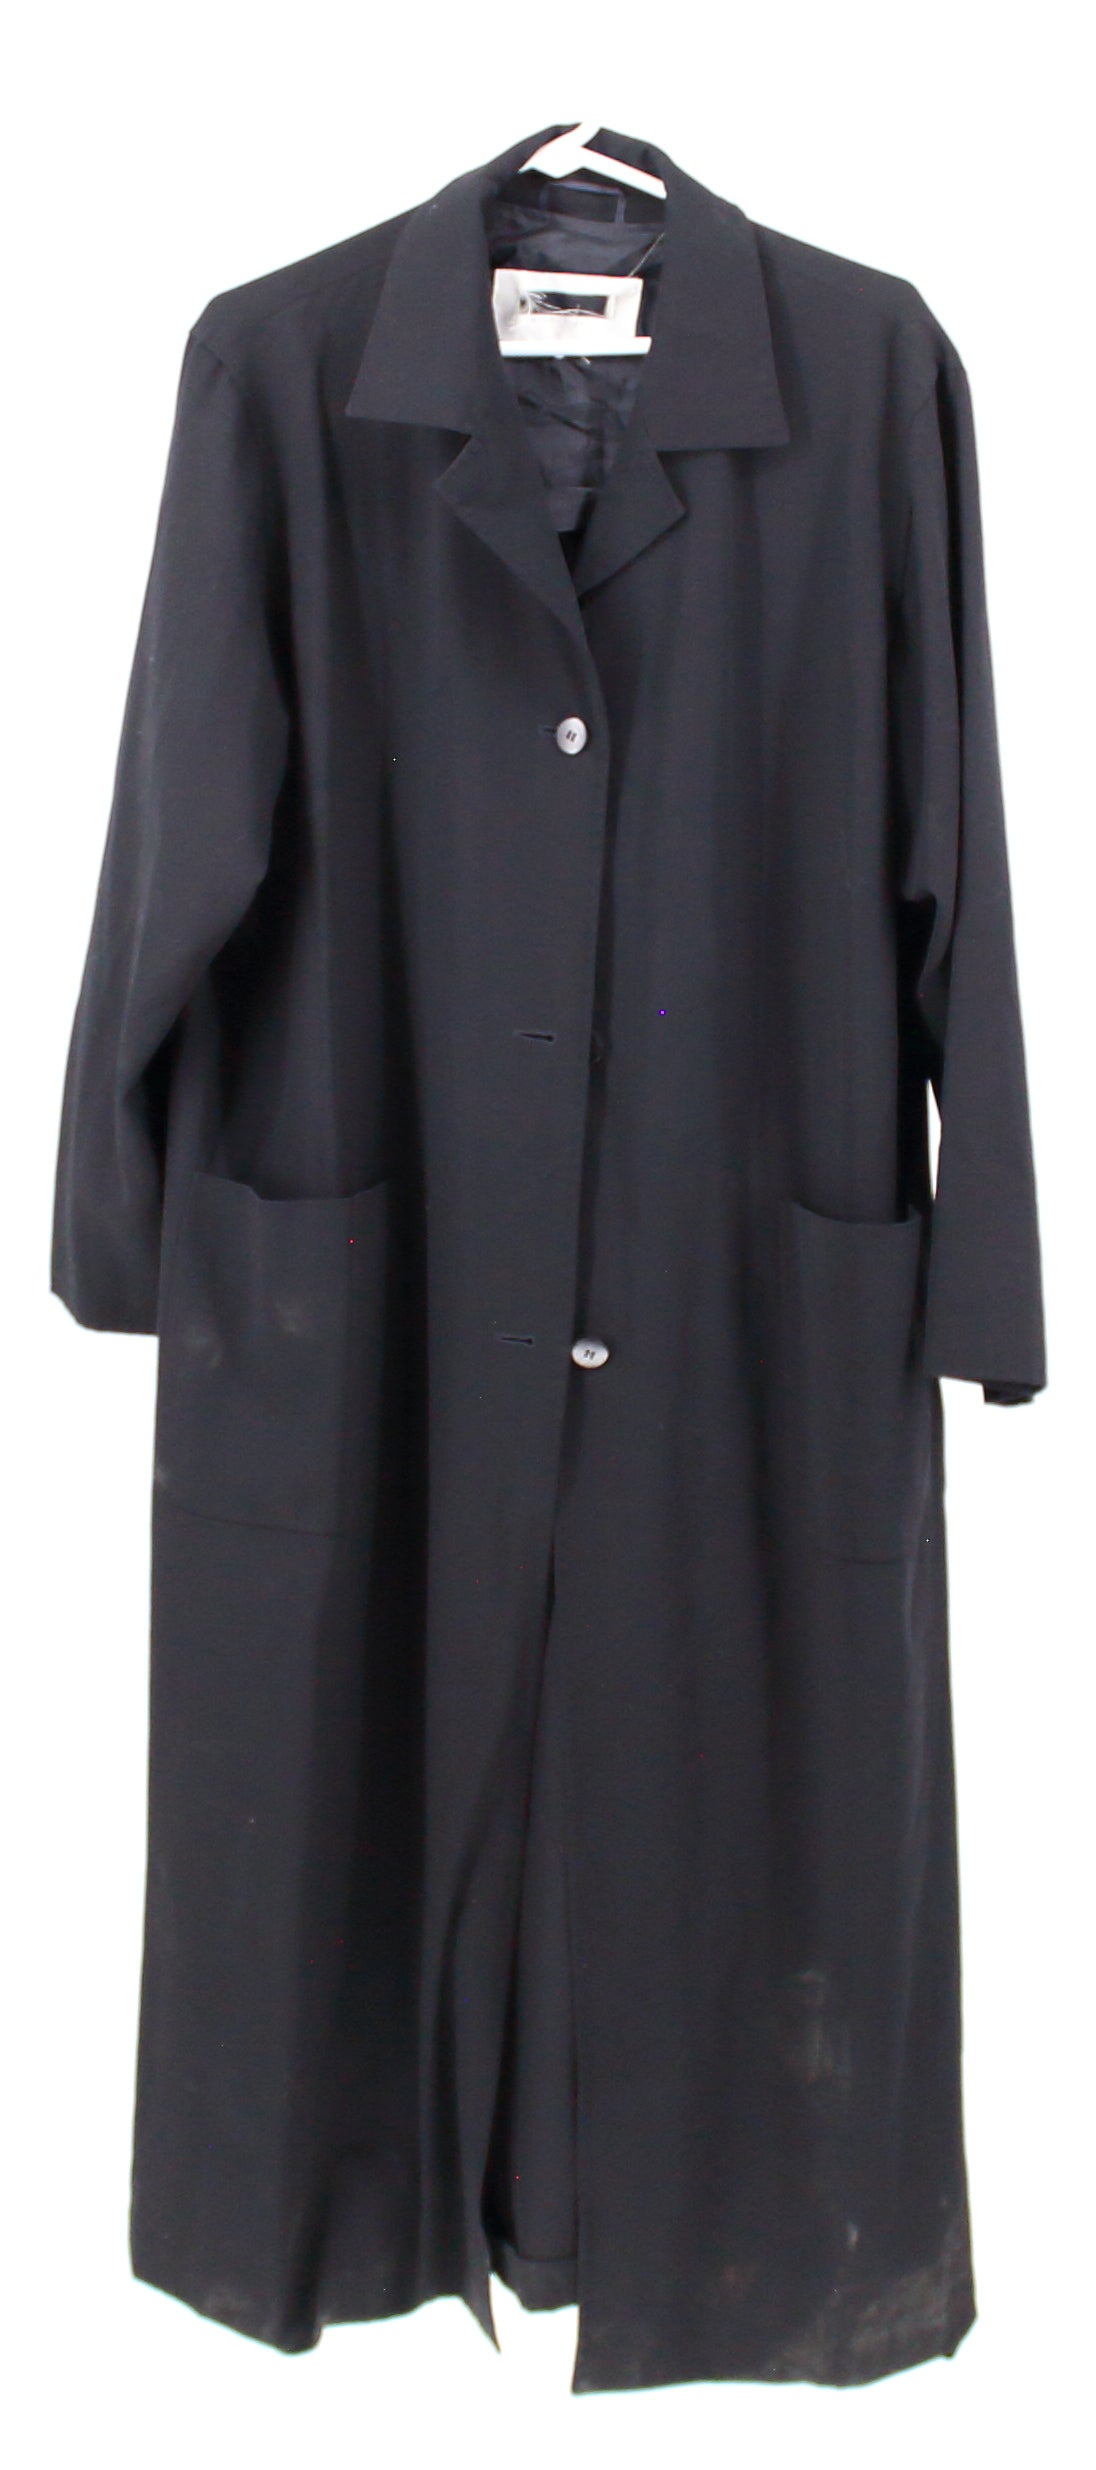 Long Black Button-Up Trench Coat